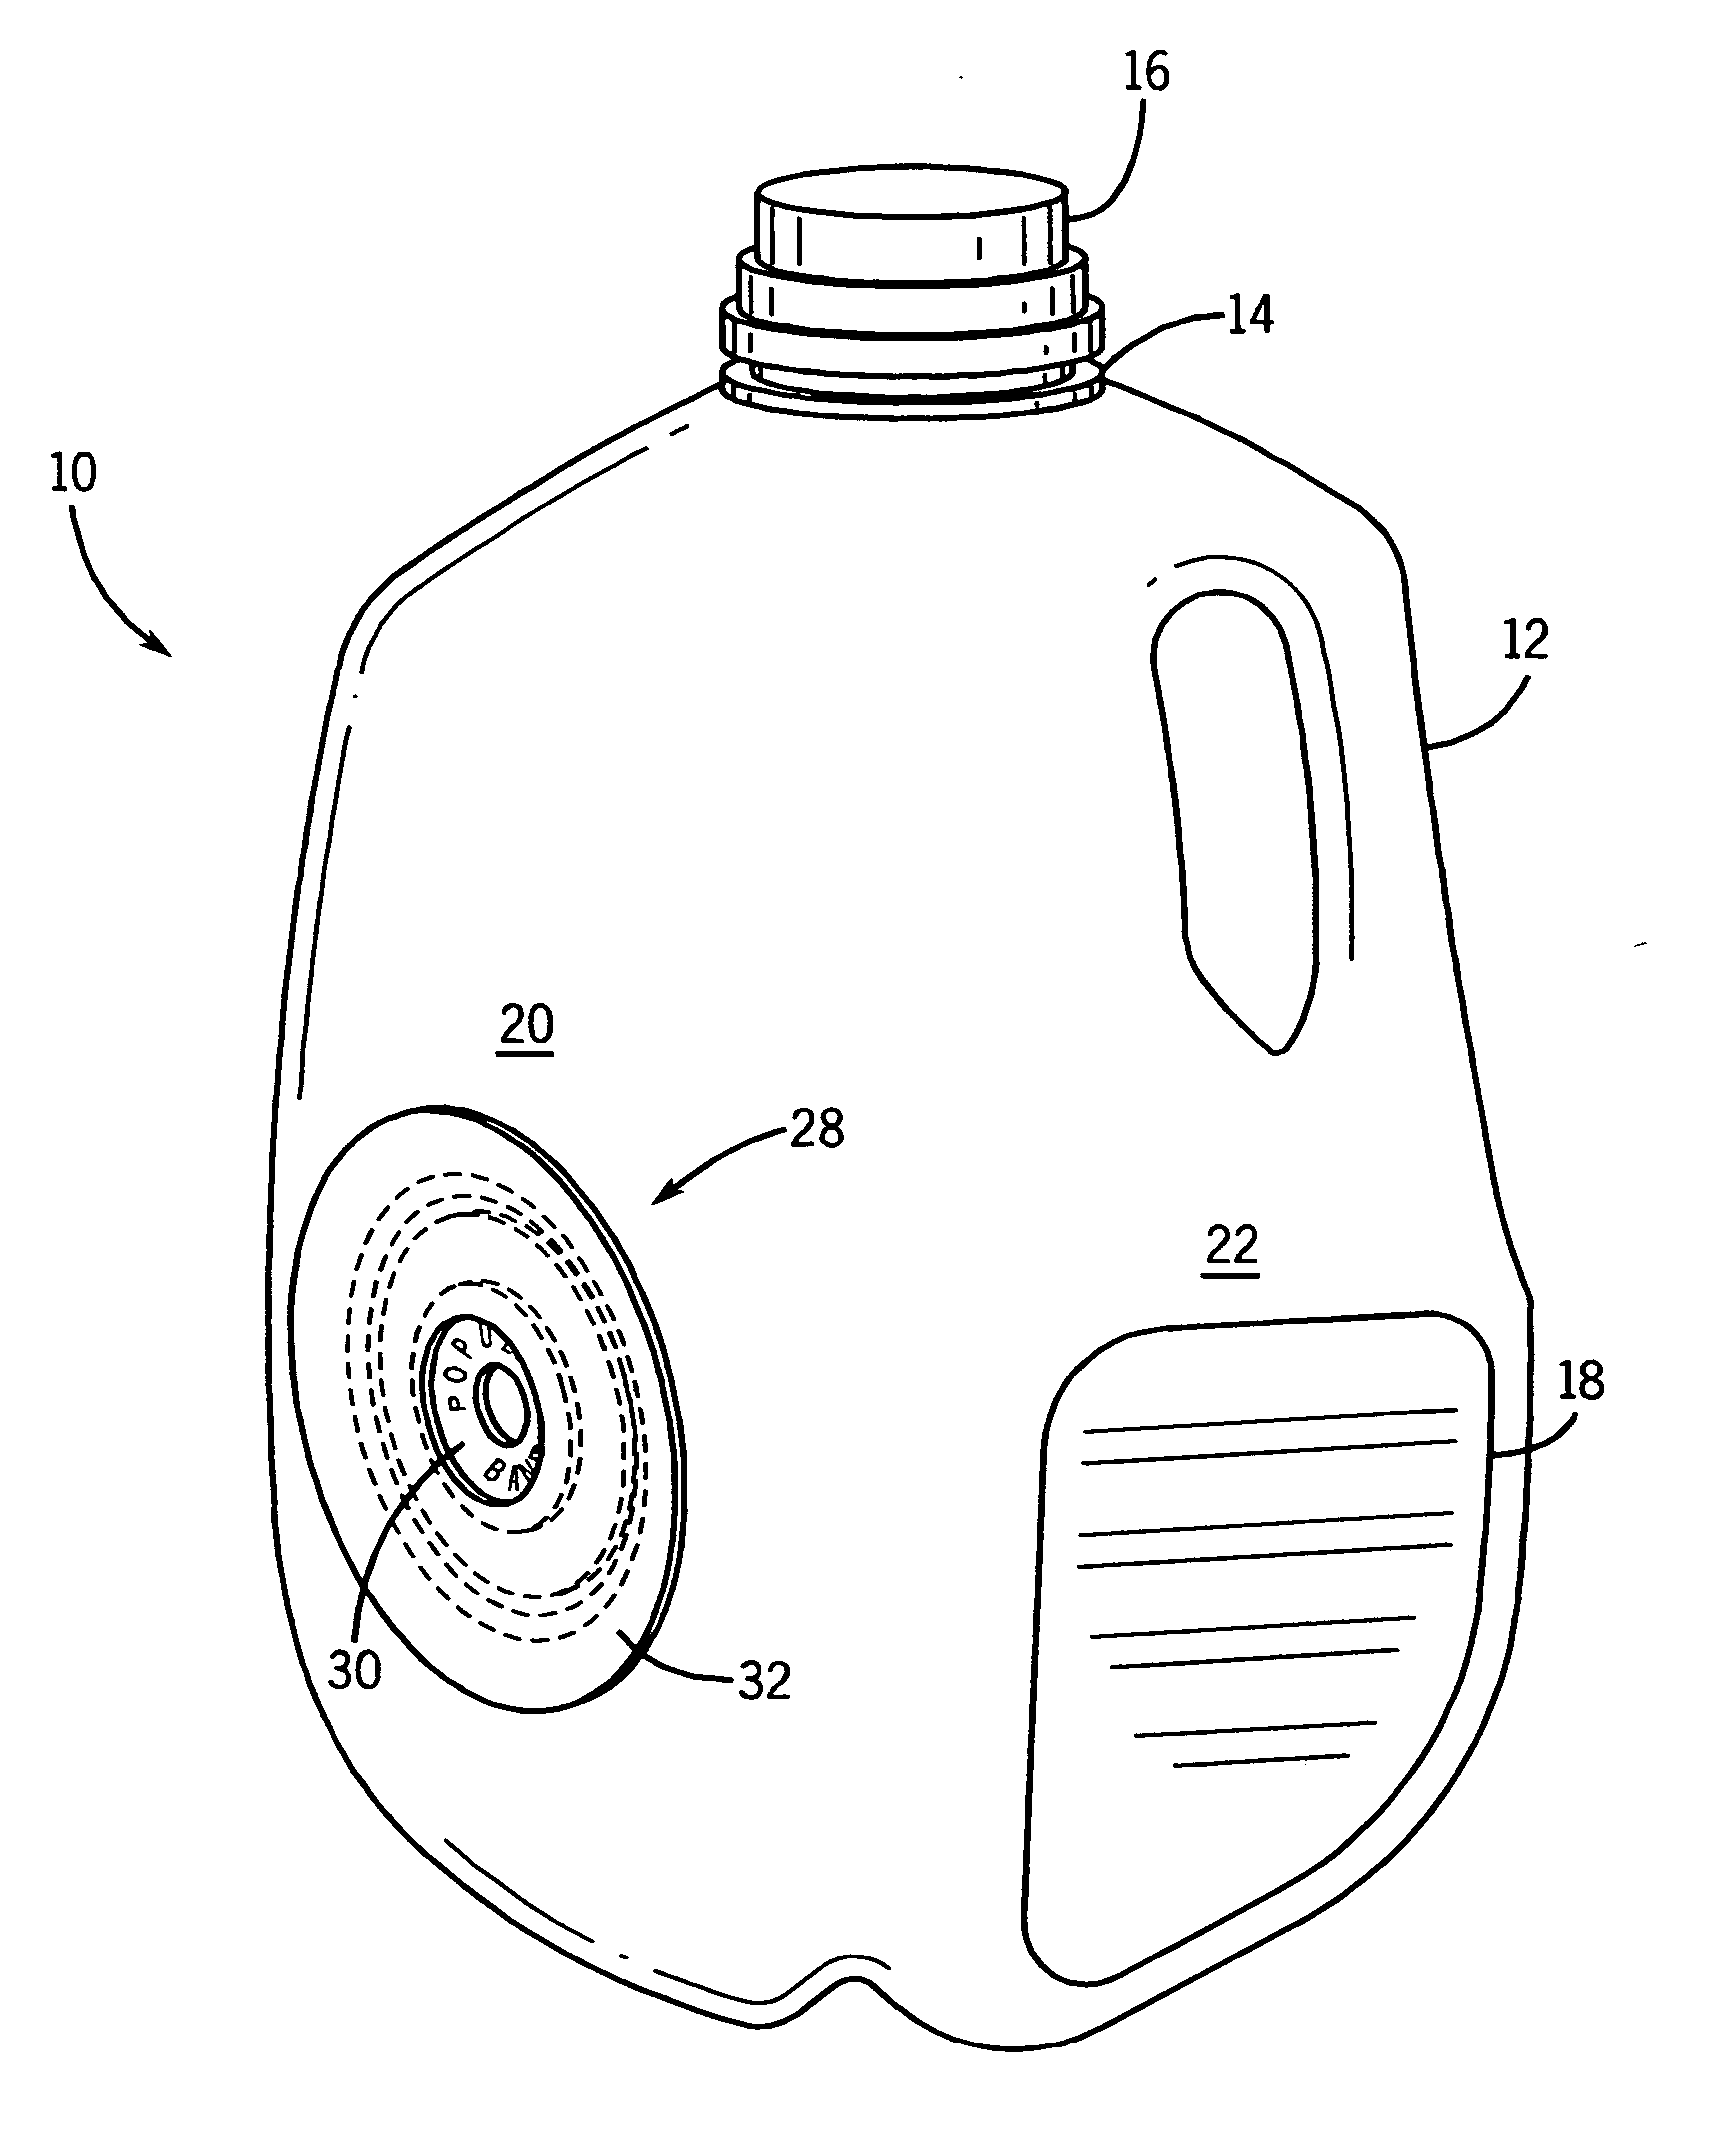 Packaging system for including digital media disks with consumer products